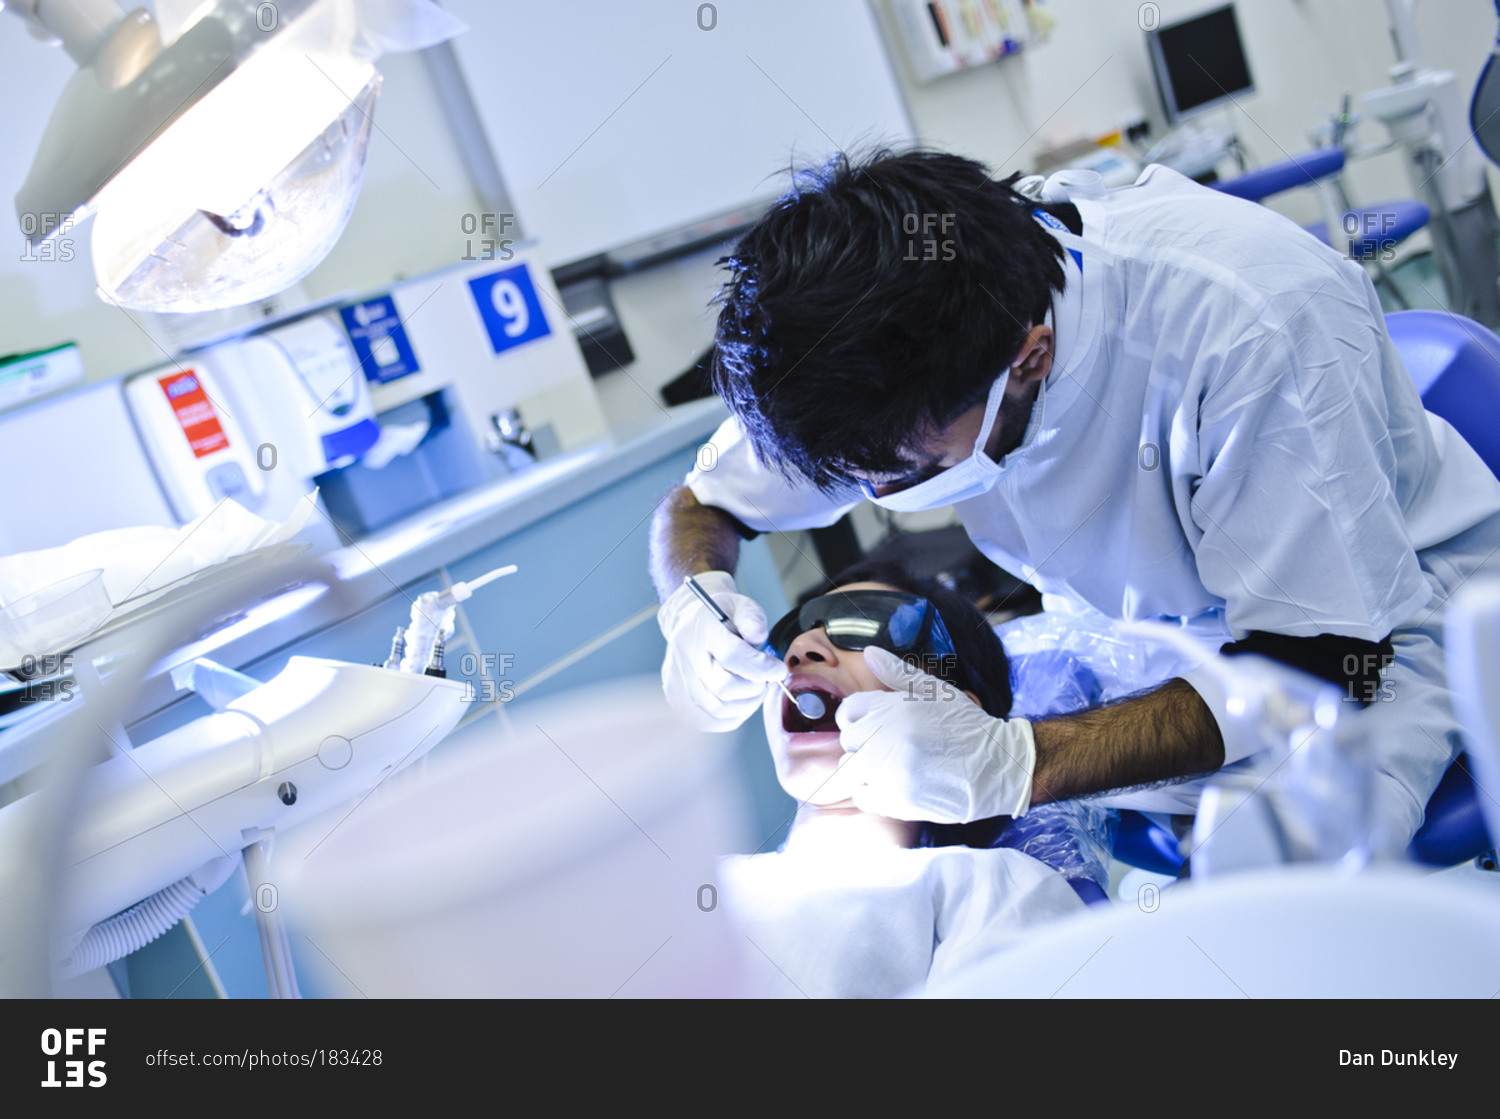 A dental student performing dental surgery on a patient